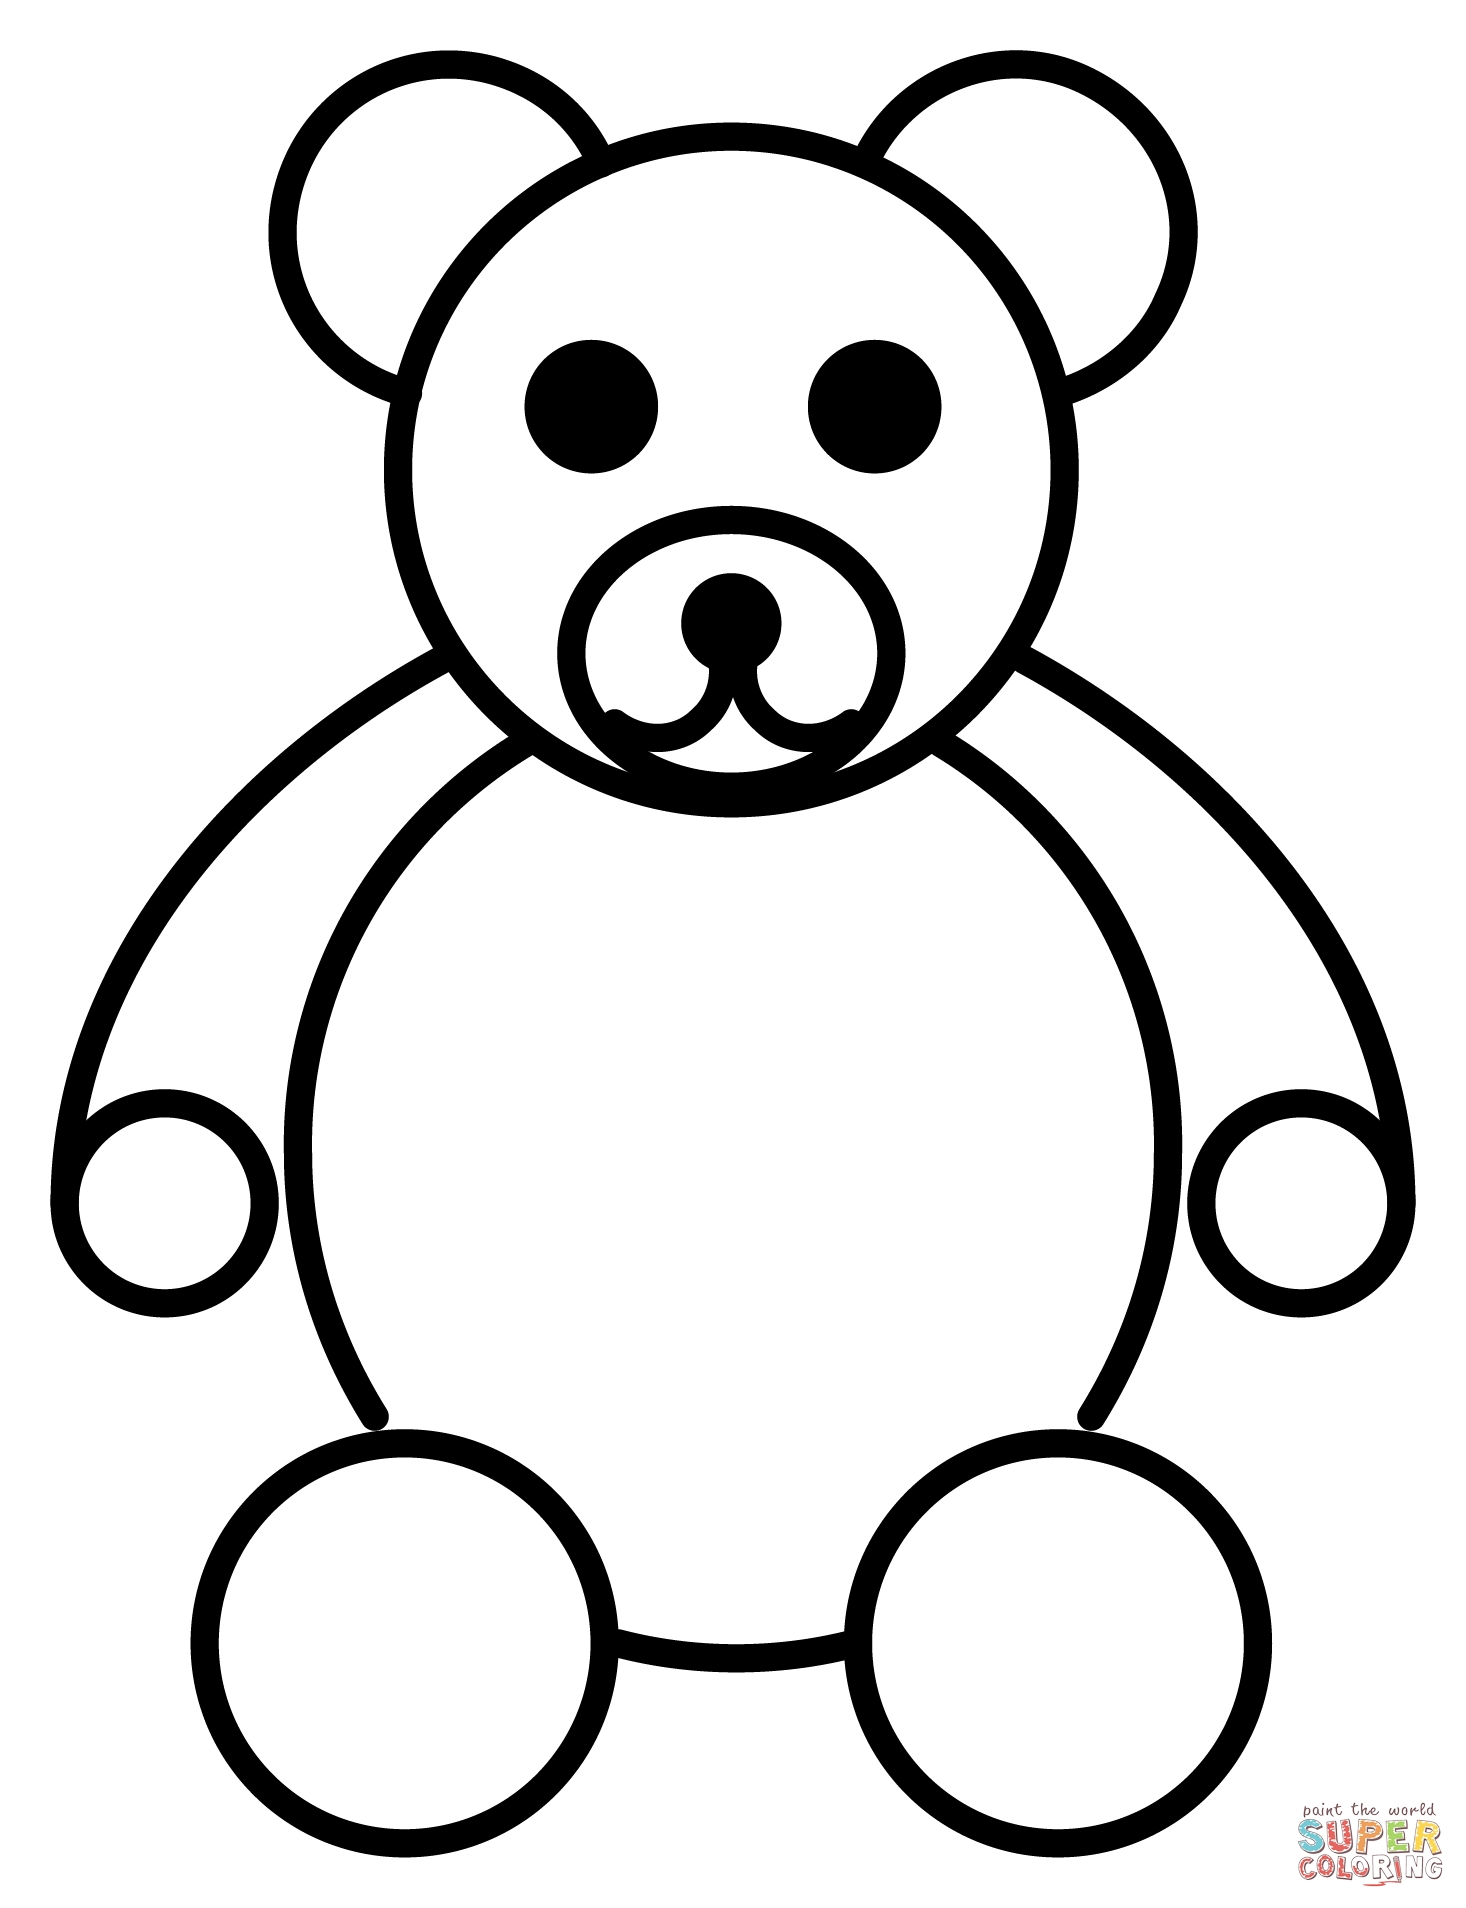 Teddy bear emoji coloring page free printable coloring pages